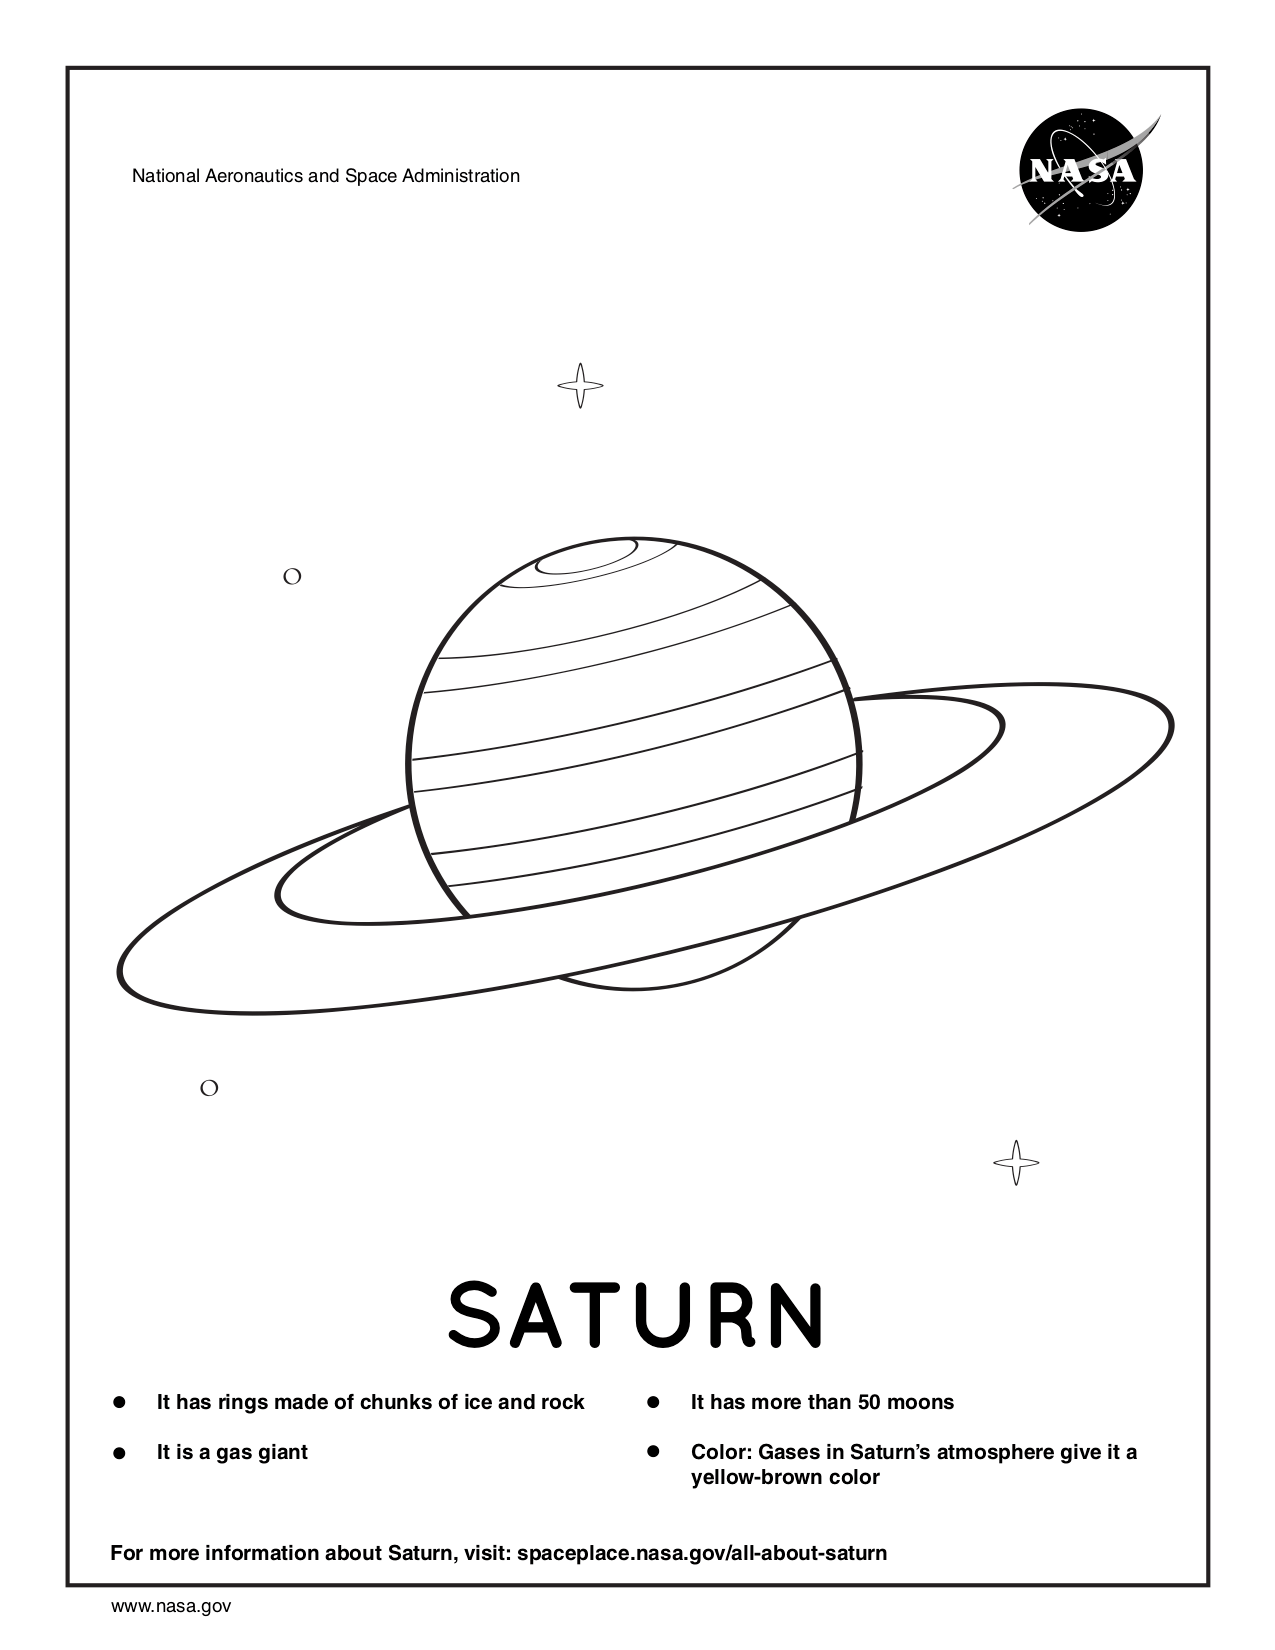 Black and white coloring page for Saturn, a round planet with a ring around it.